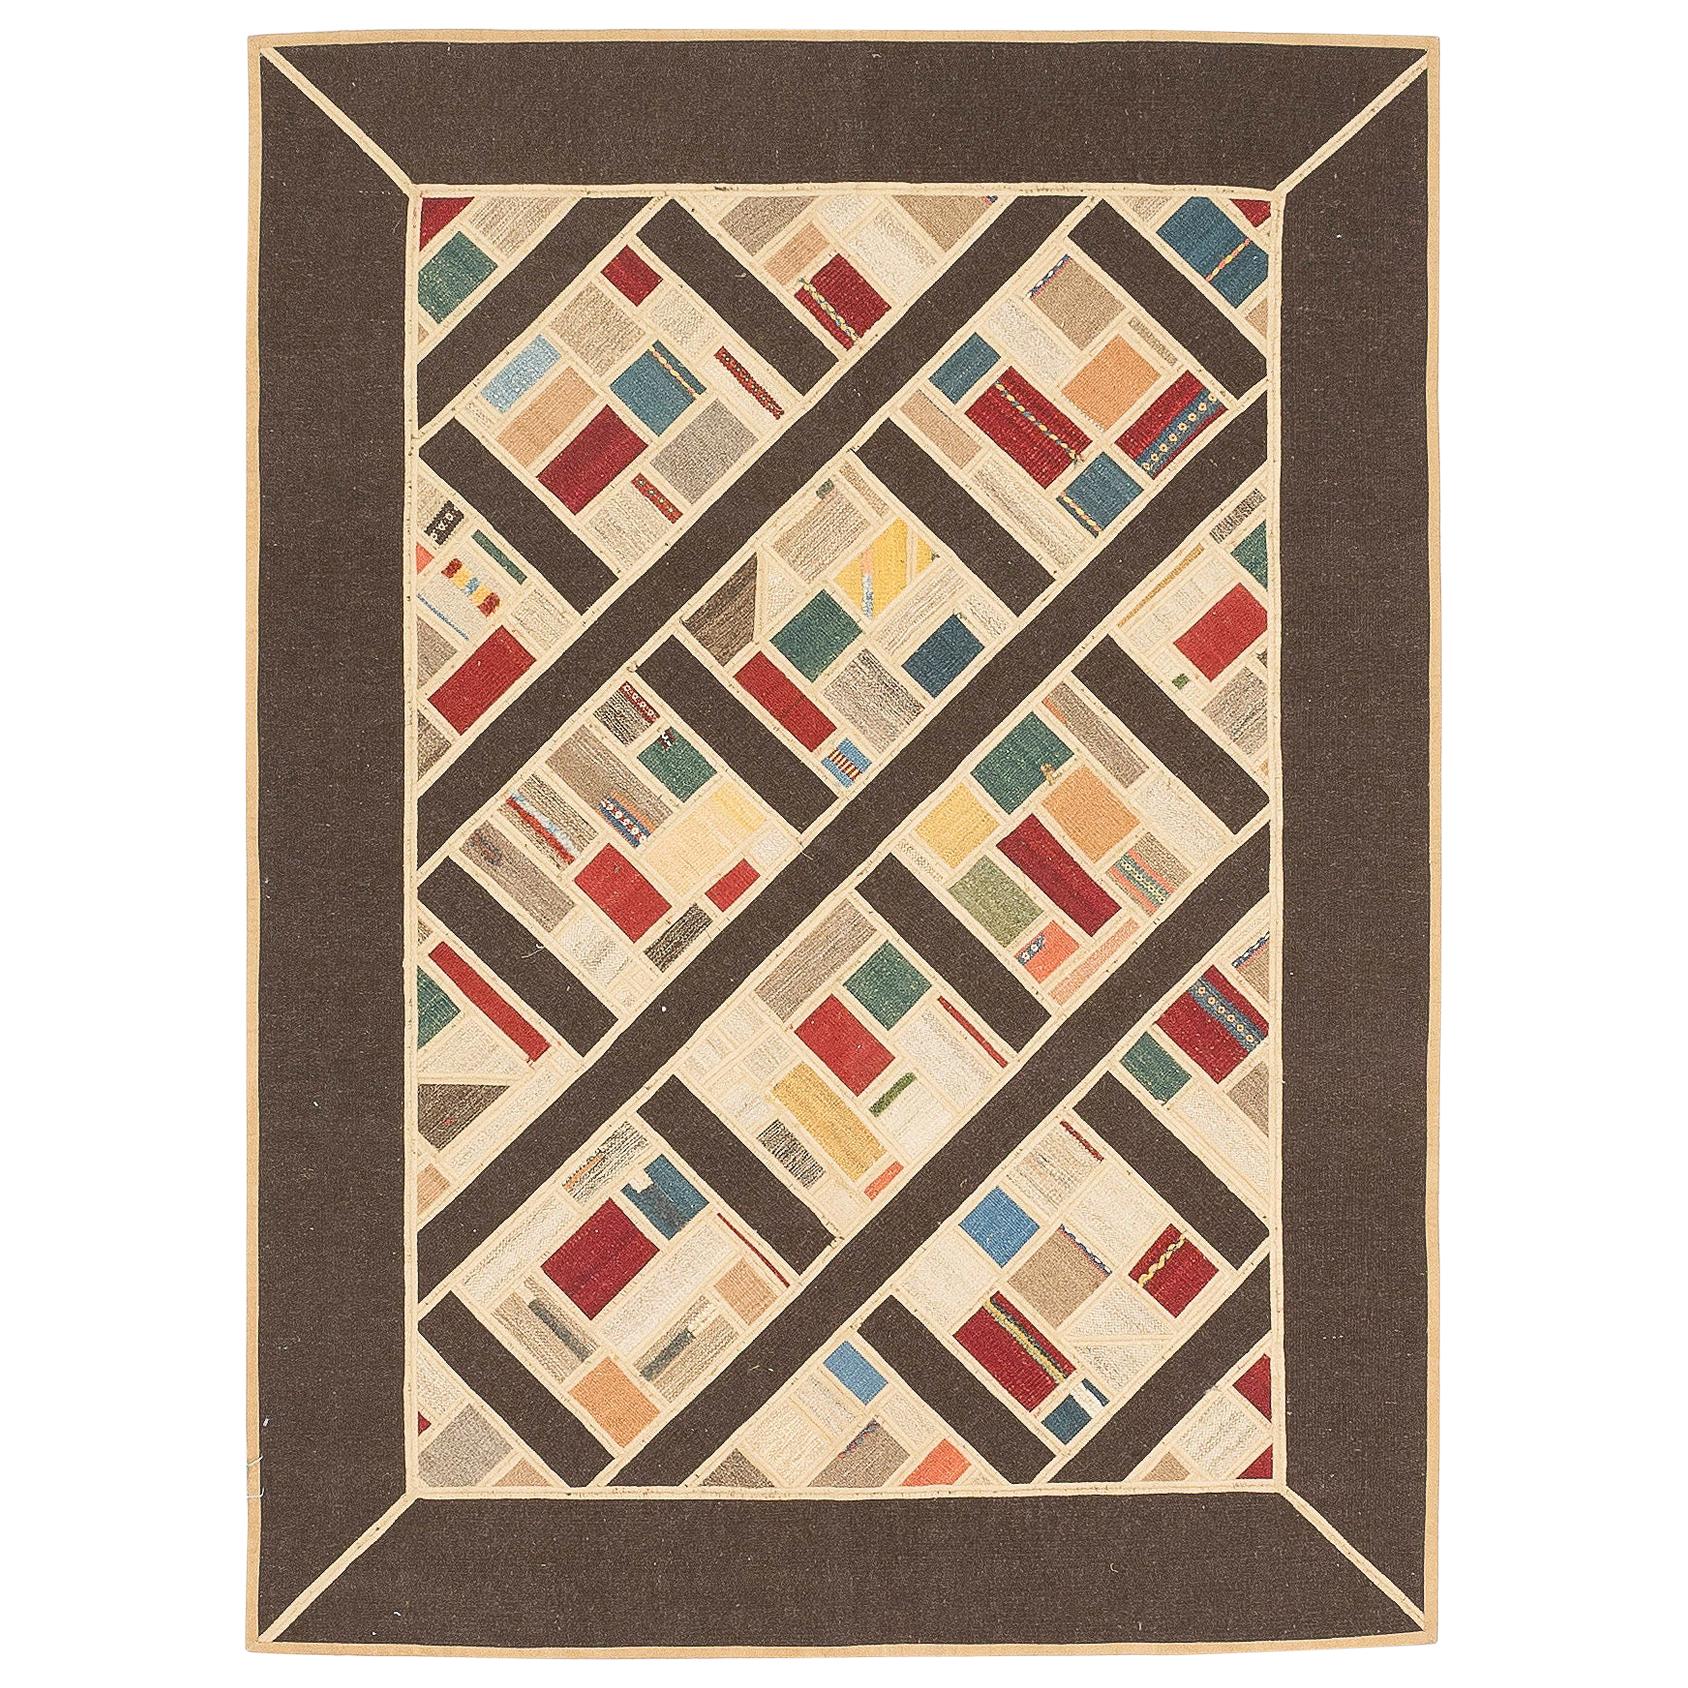 Modern Turkish Patch Kilim Rug with Colored Squares Pattern